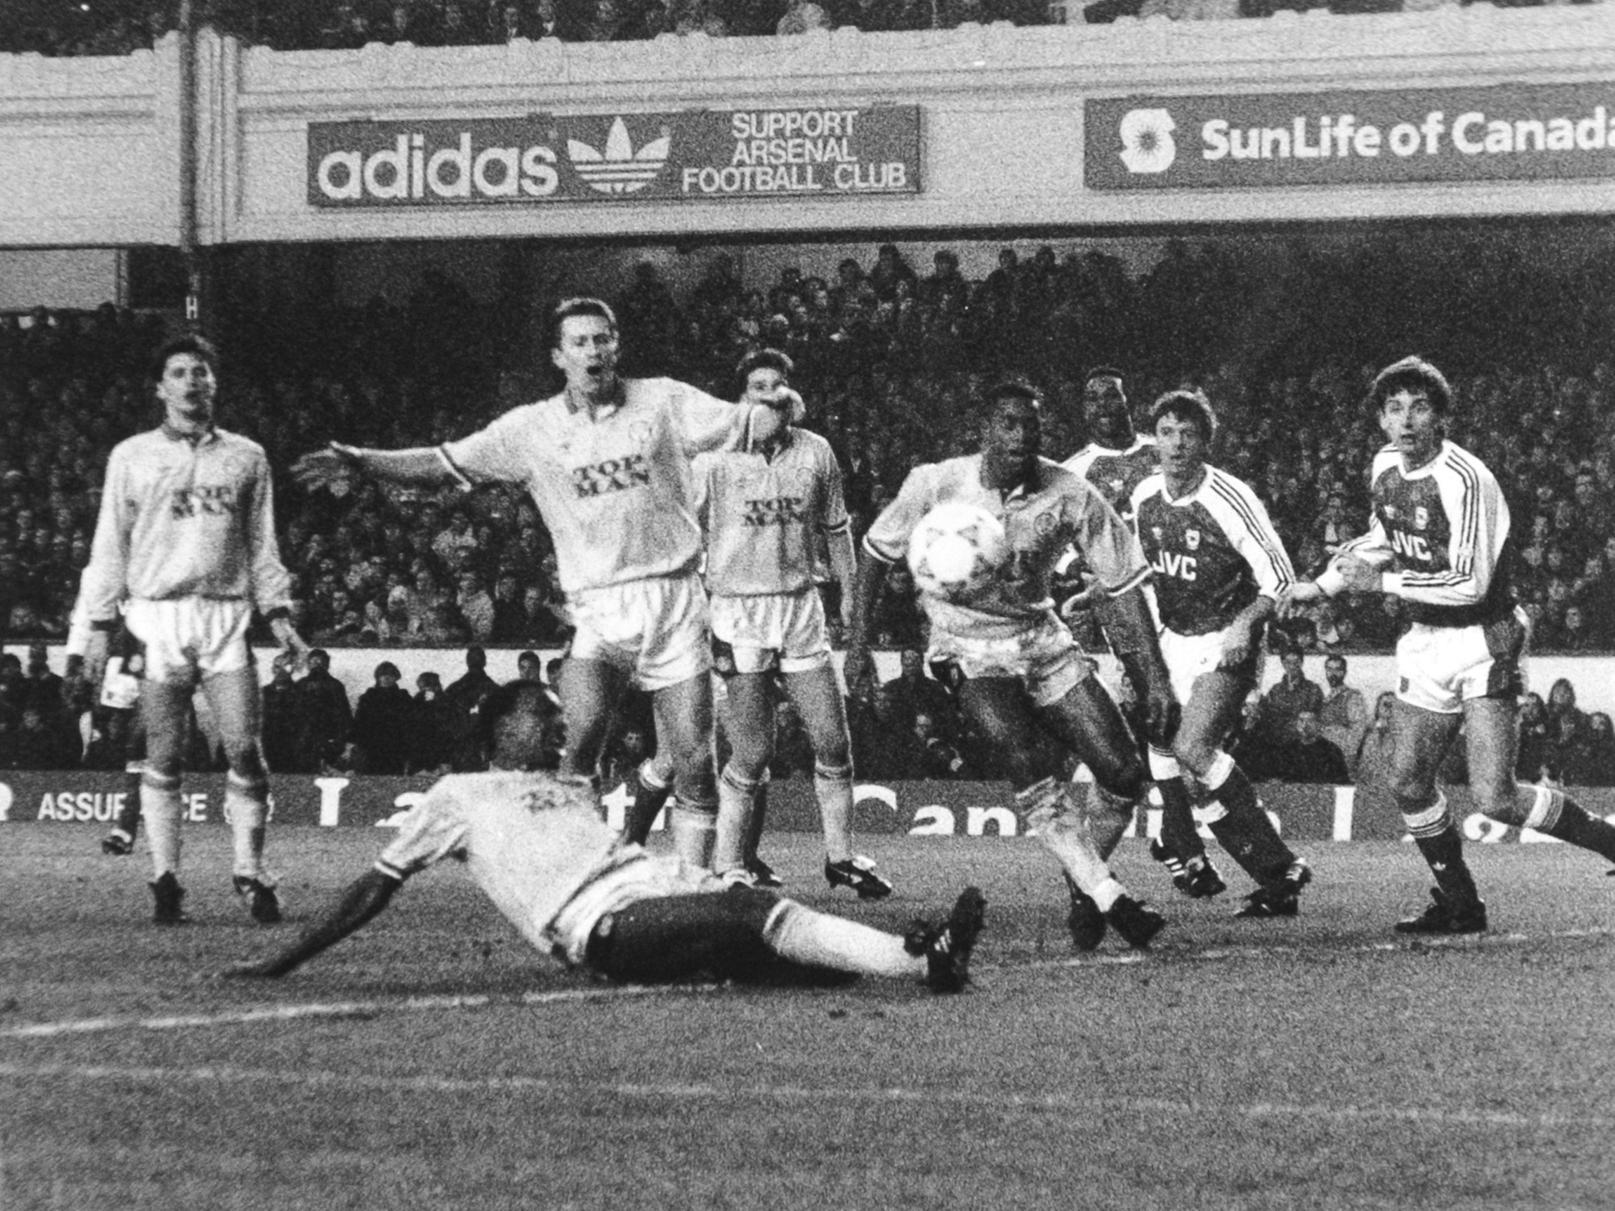 Chris Whyte, Leeds United's man of the match, slides in but the ball went just wide. Were you among the crowd at Highbury?